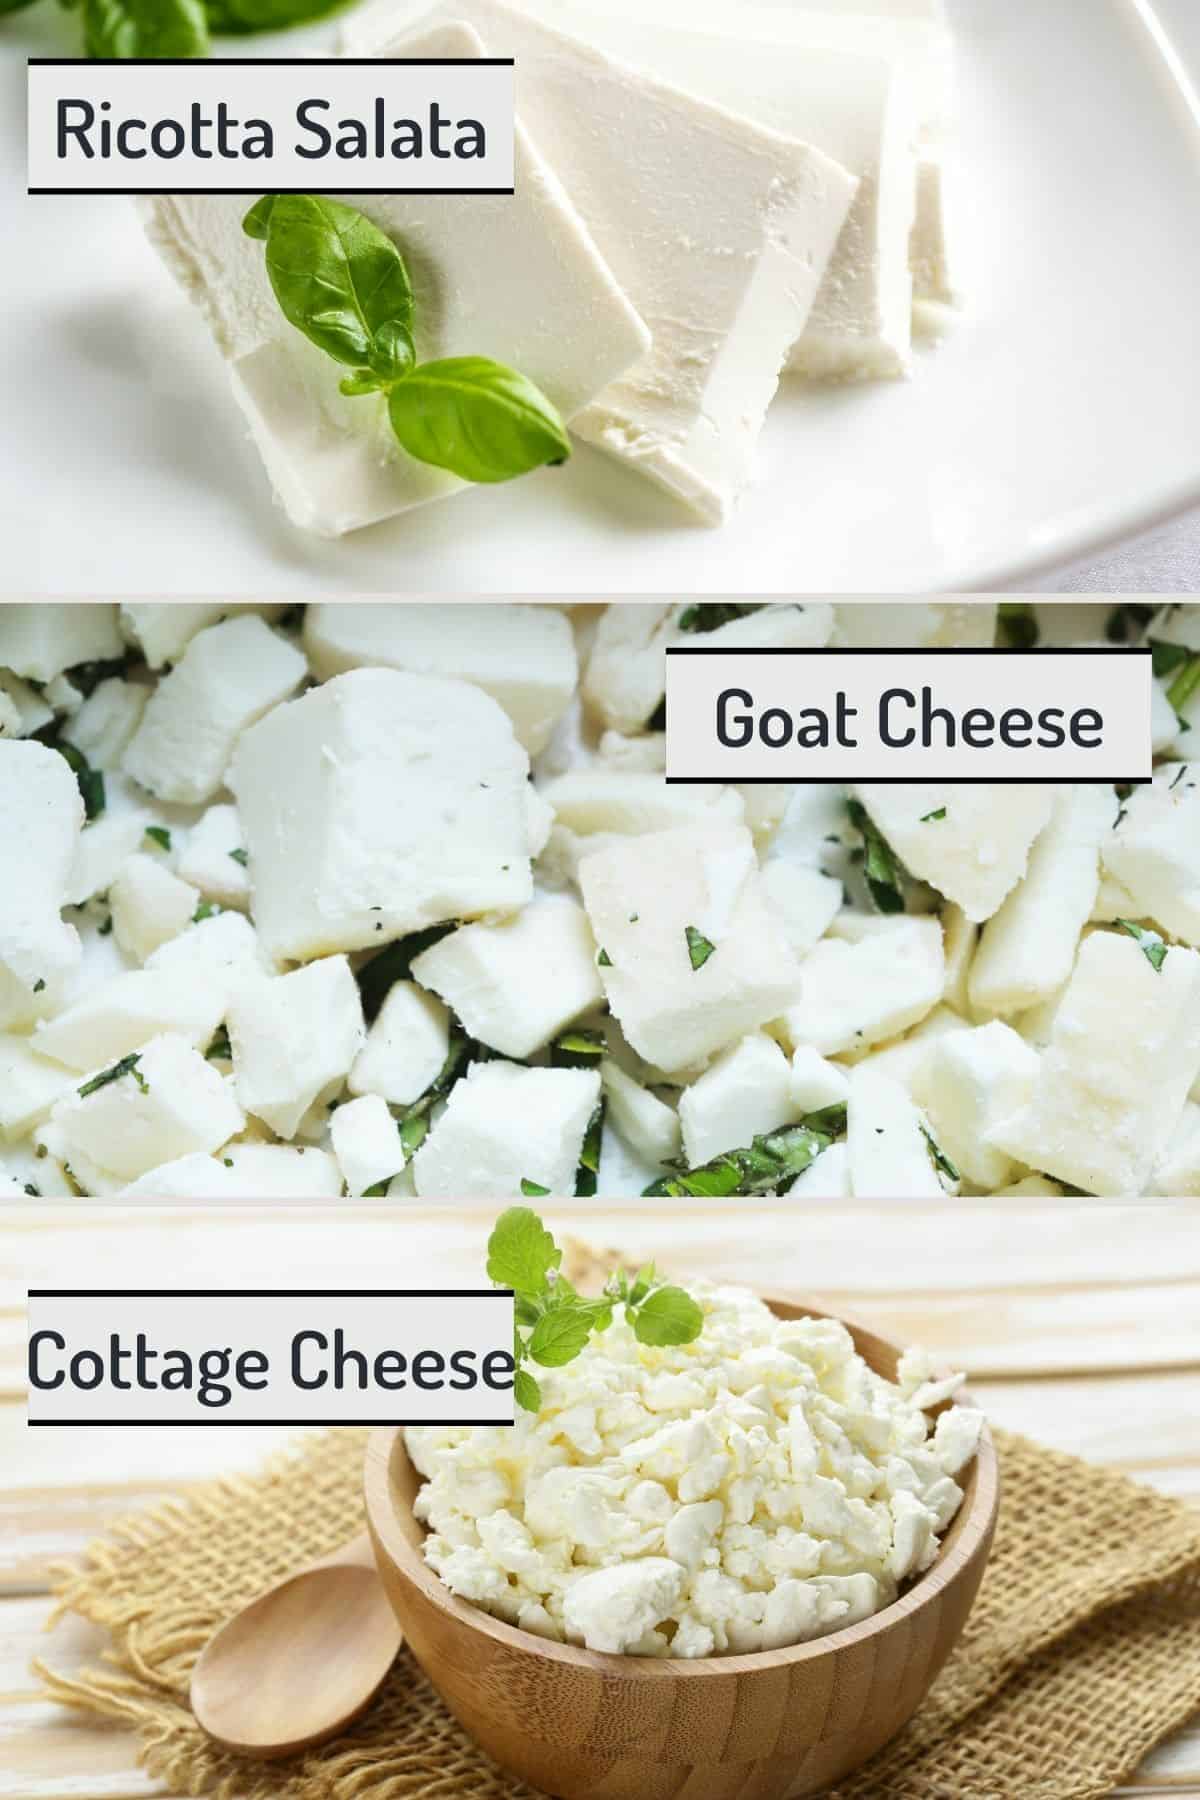 Pictures of best substitutes for texture: top to bottom: Ricotta Salata, Goat Cheese and Cottage Cheese